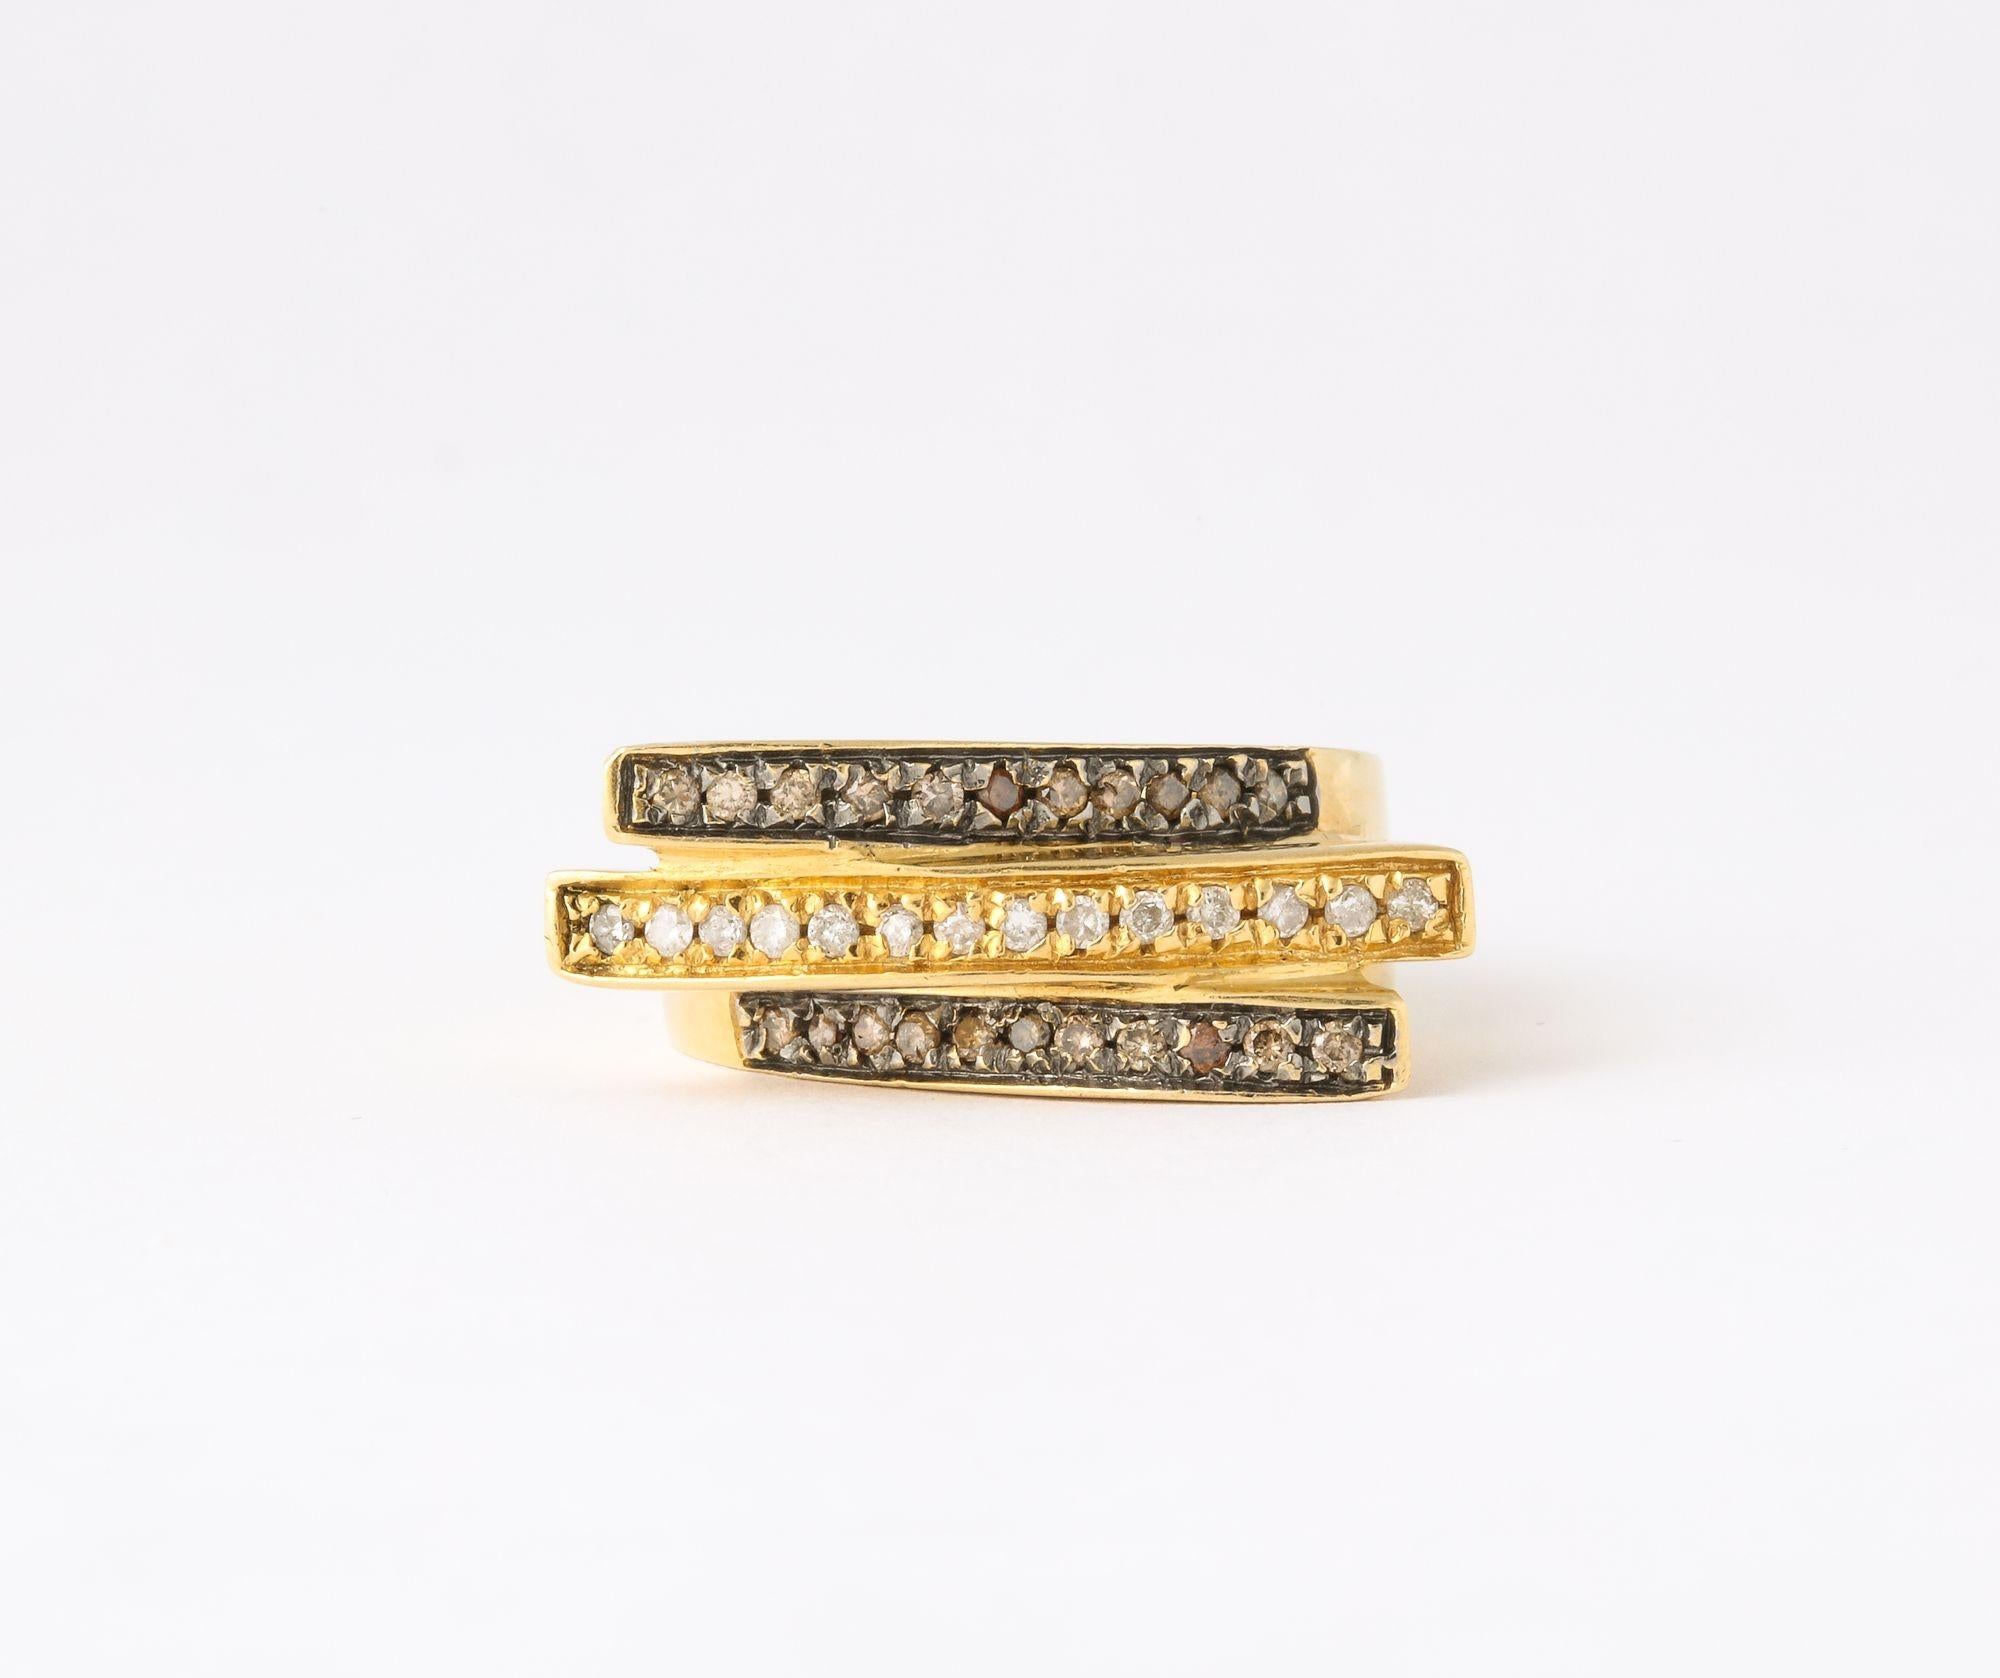 A wonderful Black and White Diamond and Gold Ring in a modernist setting.